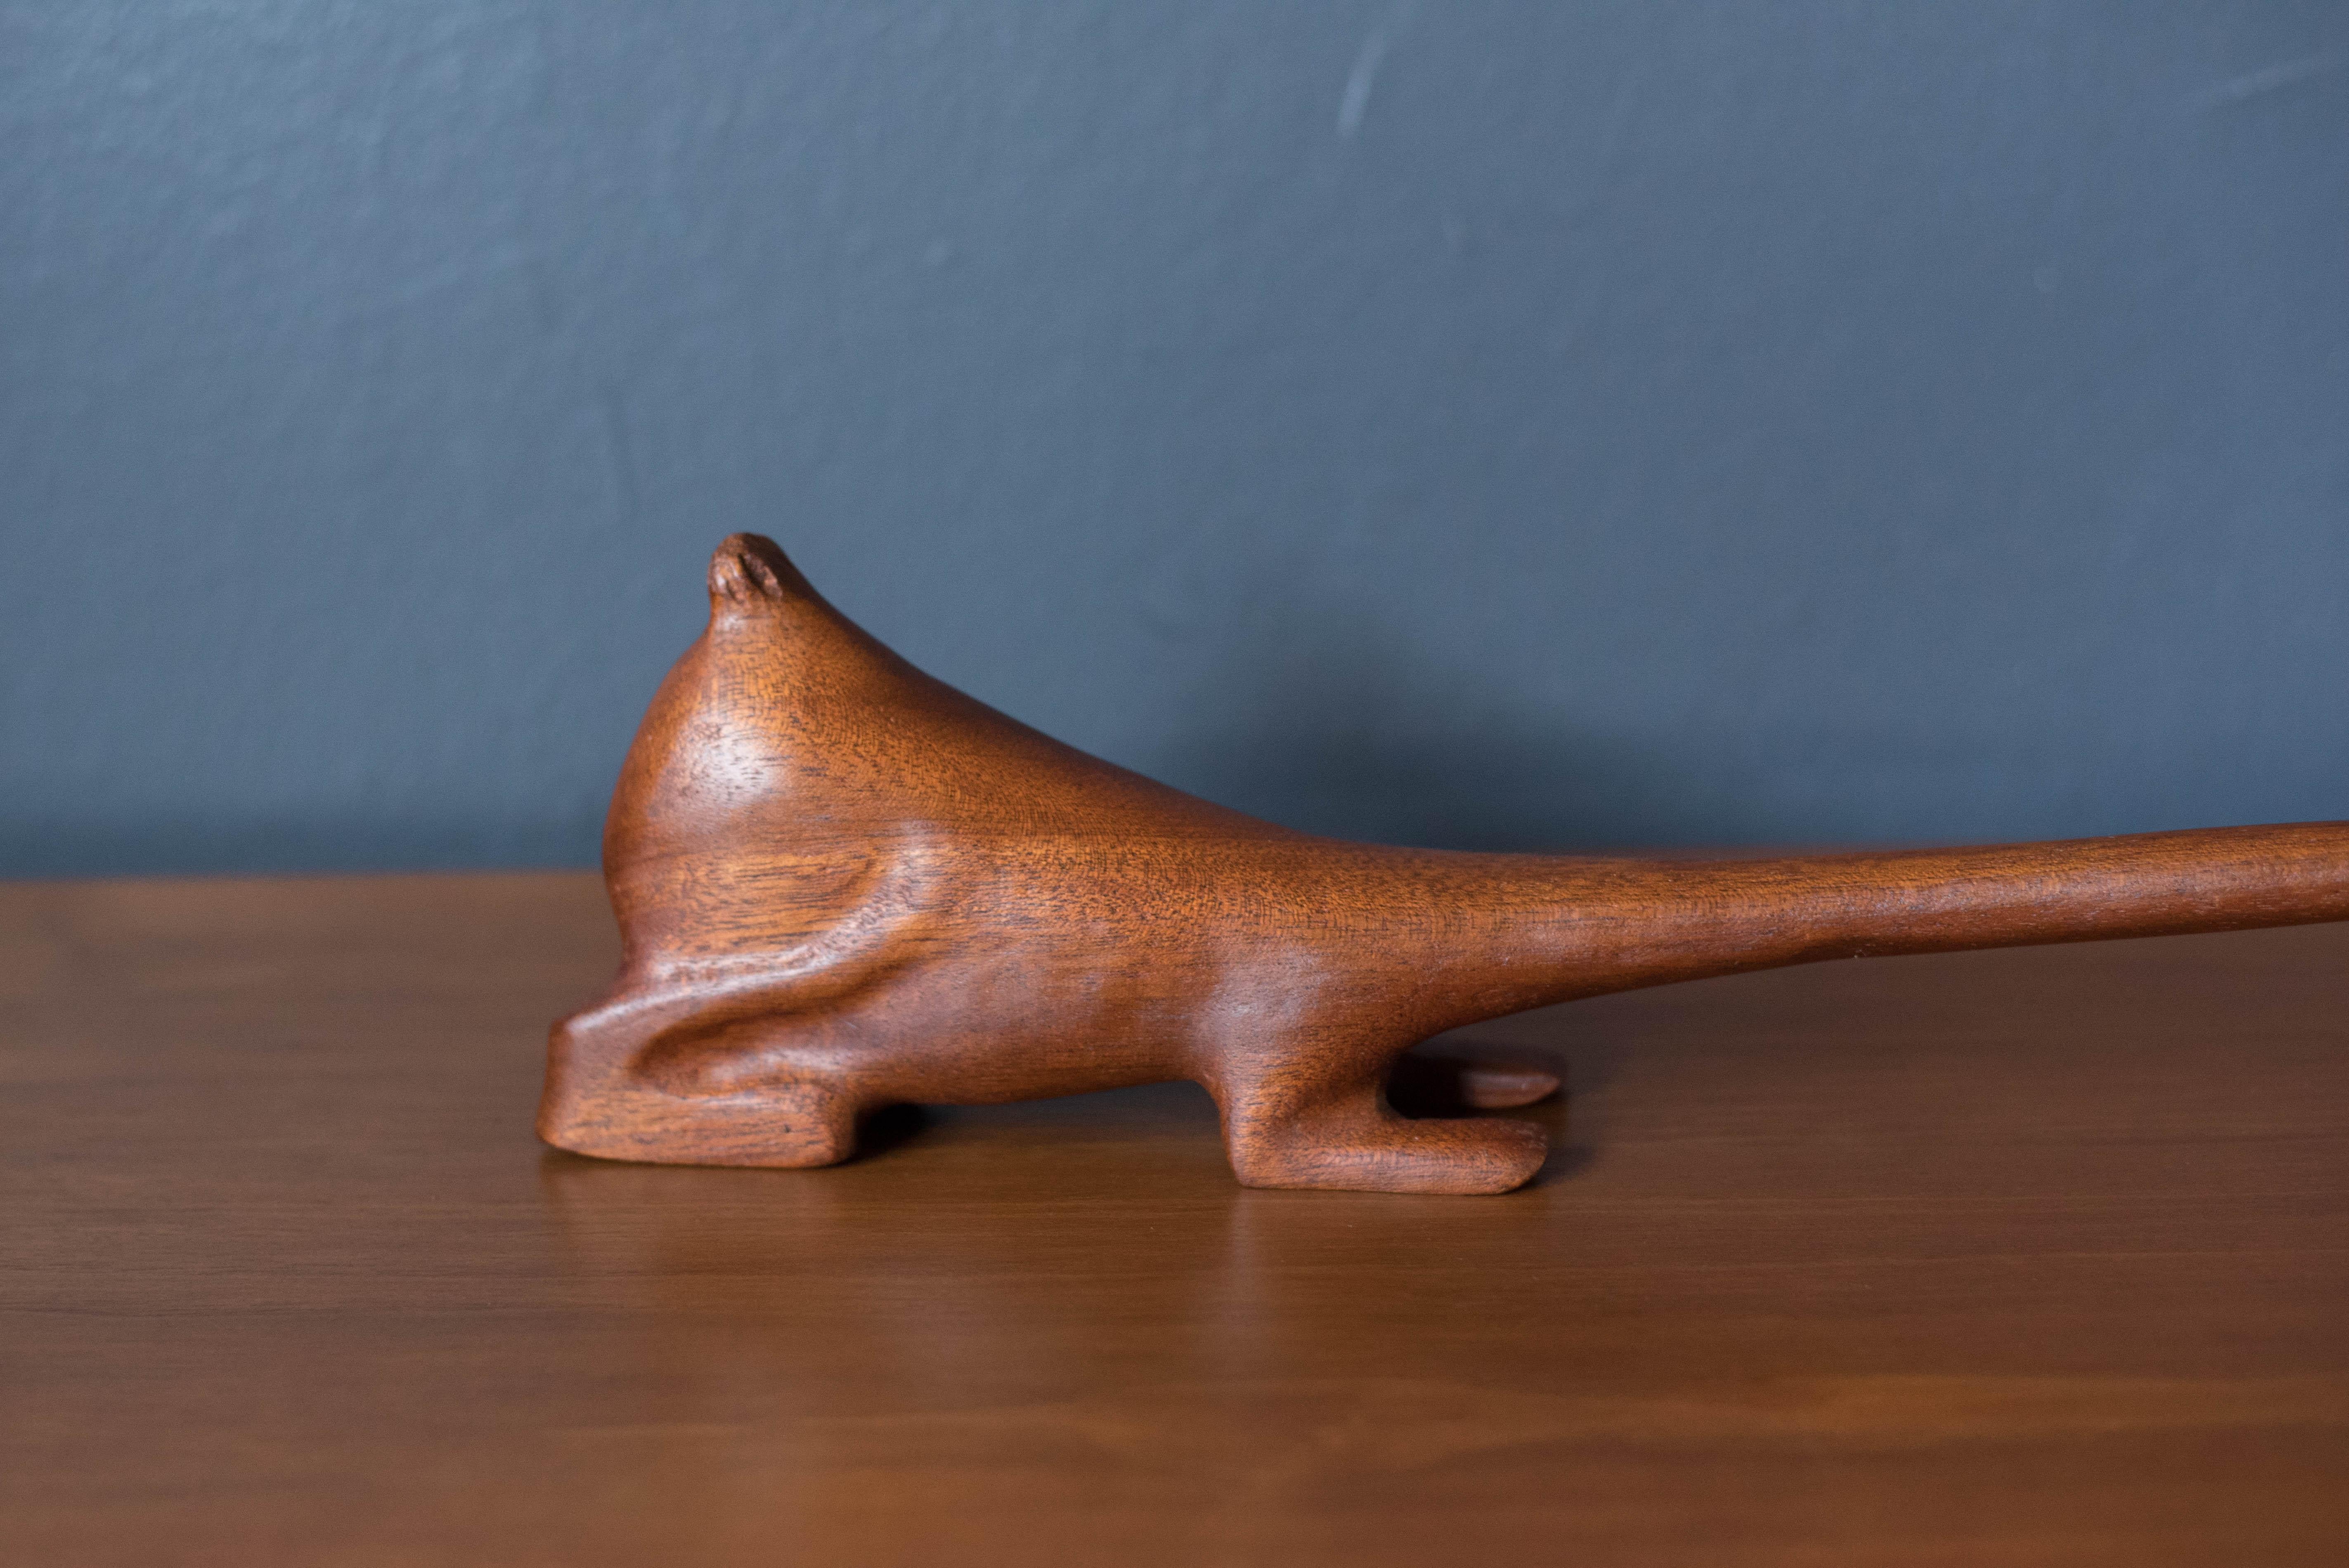 Vintage animated Aardvark sculpture hand carved in teak. Knud Albert was known for using the left over scrap wood from Danish furniture to create his figurines. This abstract animal displays a dramatically long neck with cartoon eyes.